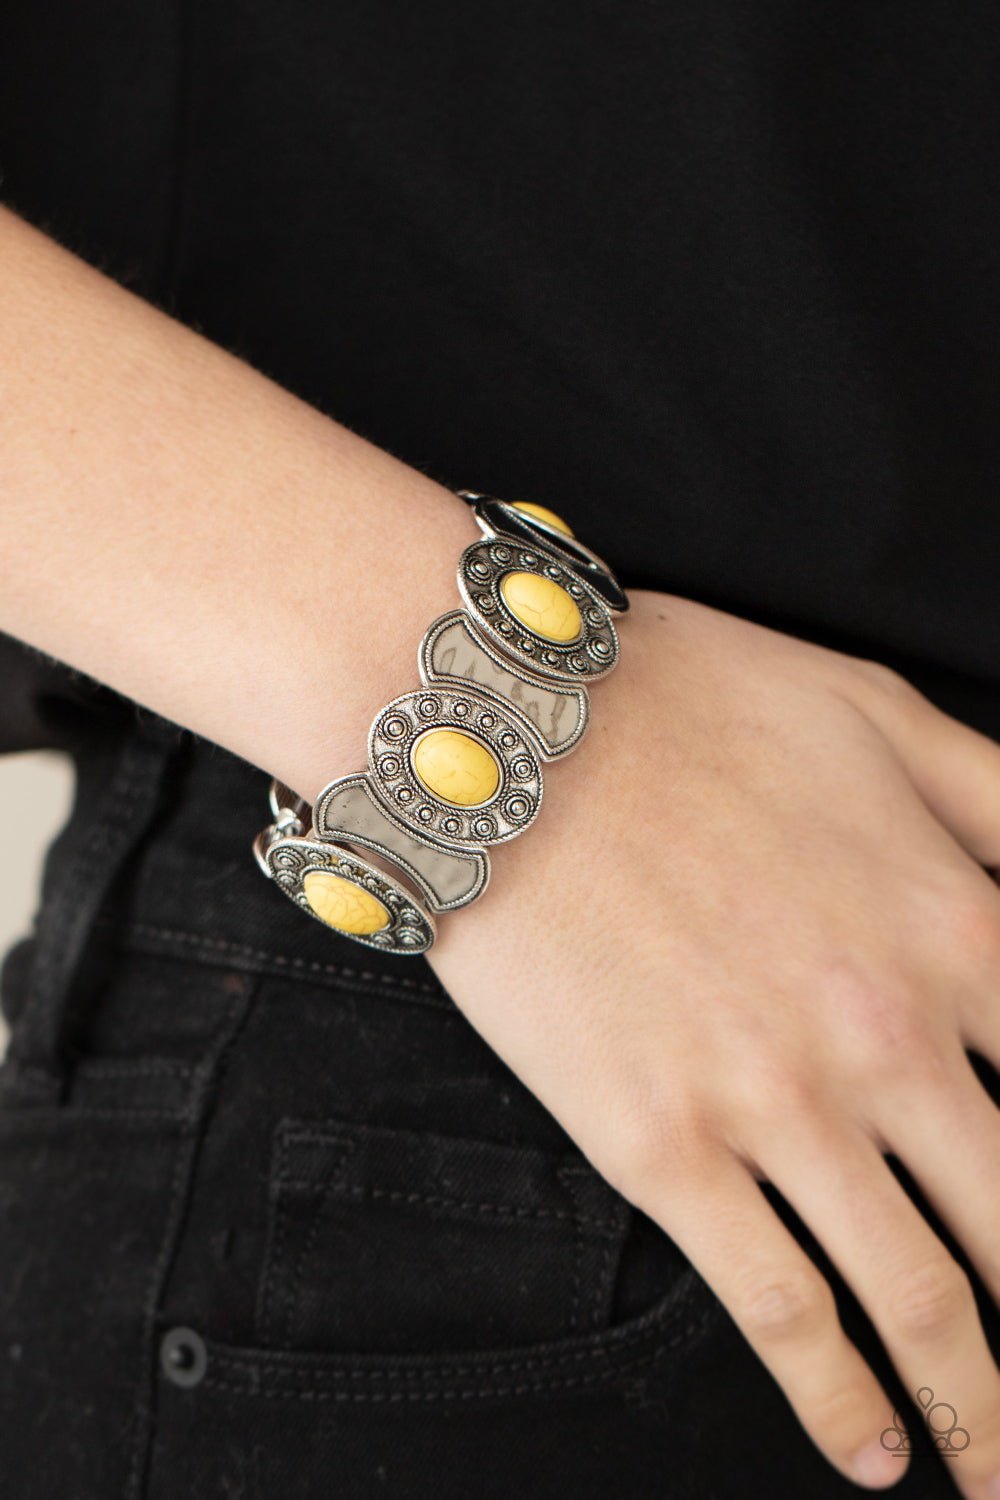 Desert Relic - Yellow Stone - Silver Stretchy Bracelet - Paparazzi Accessories - Dotted in ornate silver studs, yellow stone embellished silver frames join hammered silver plates along stretchy bands around the wrist for a colorful seasonal flair. Sold as one individual bracelet.